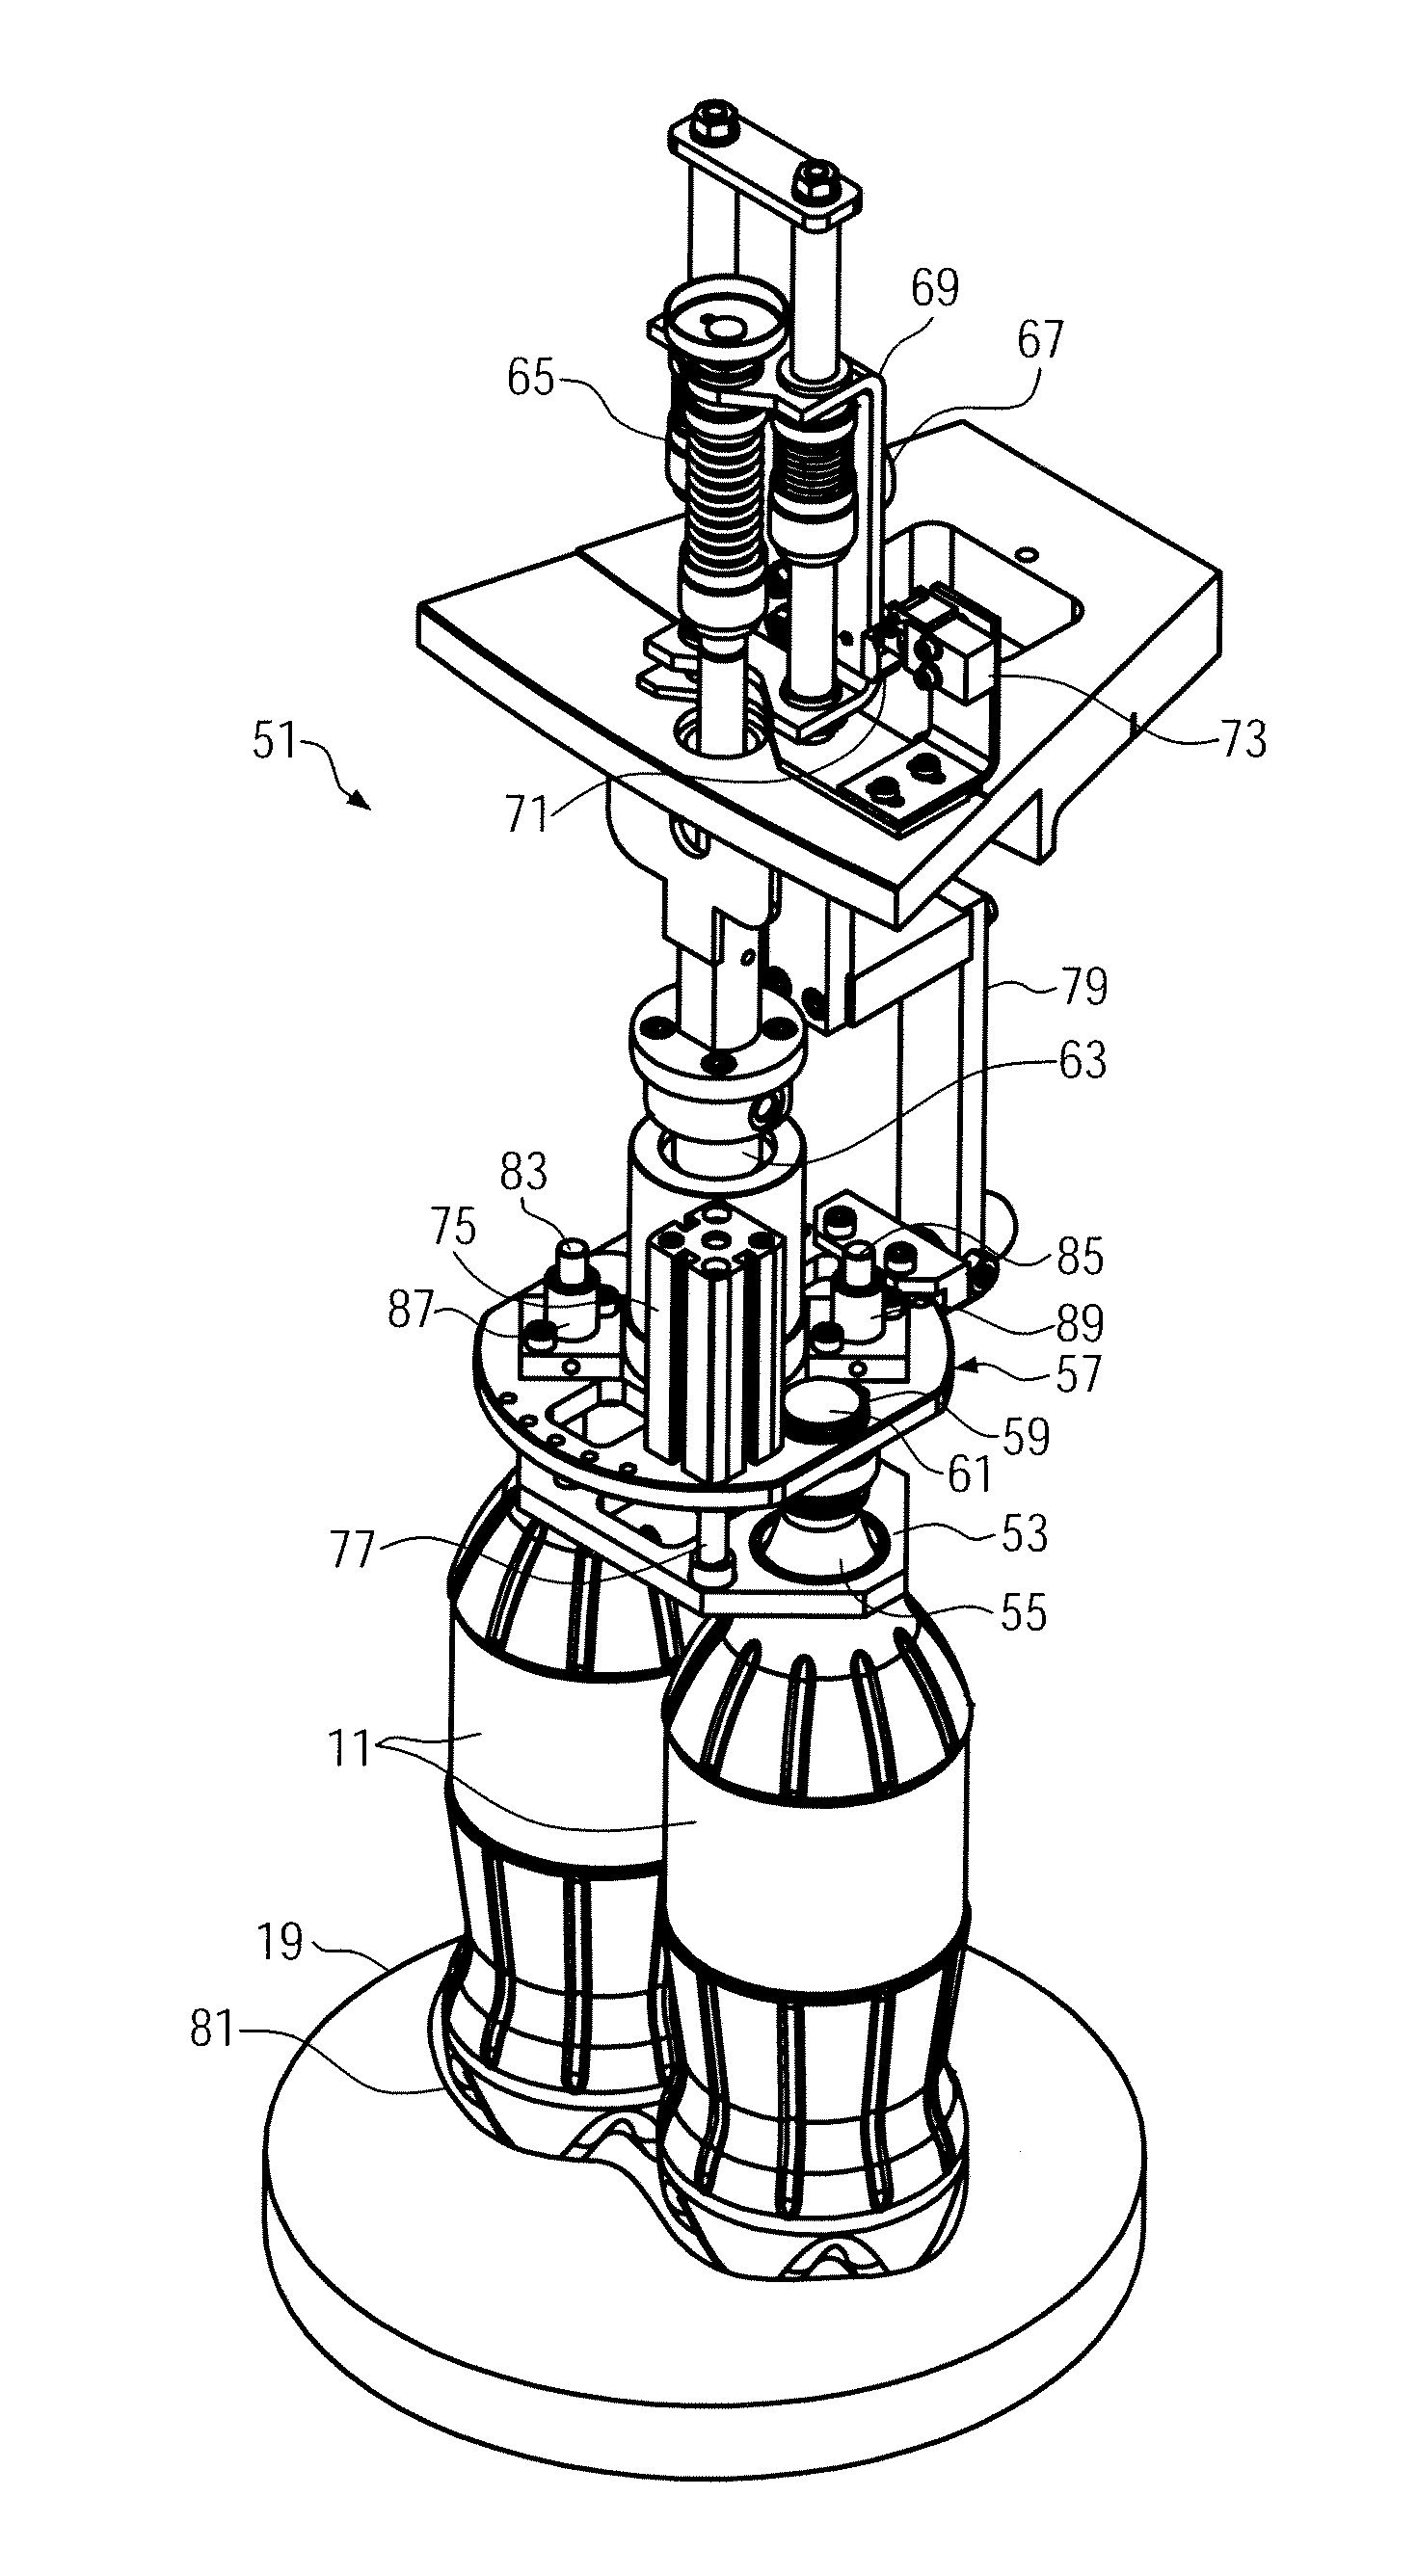 Centering unit for aligning at least two grouped vessels and method for aligning two grouped vessels